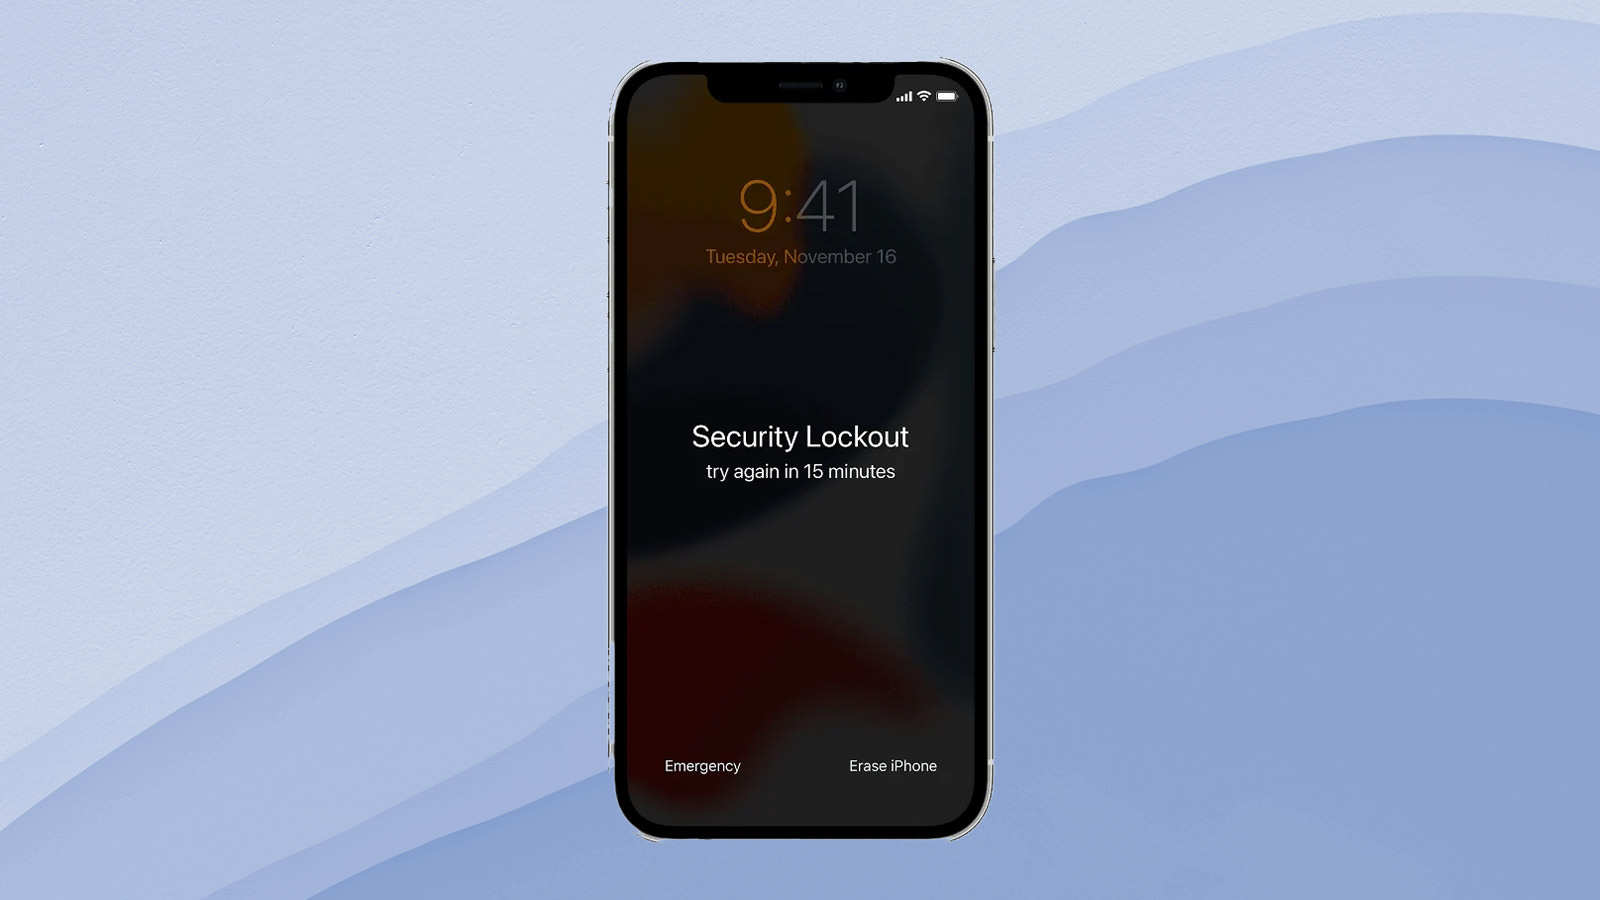 iPhone security lockout